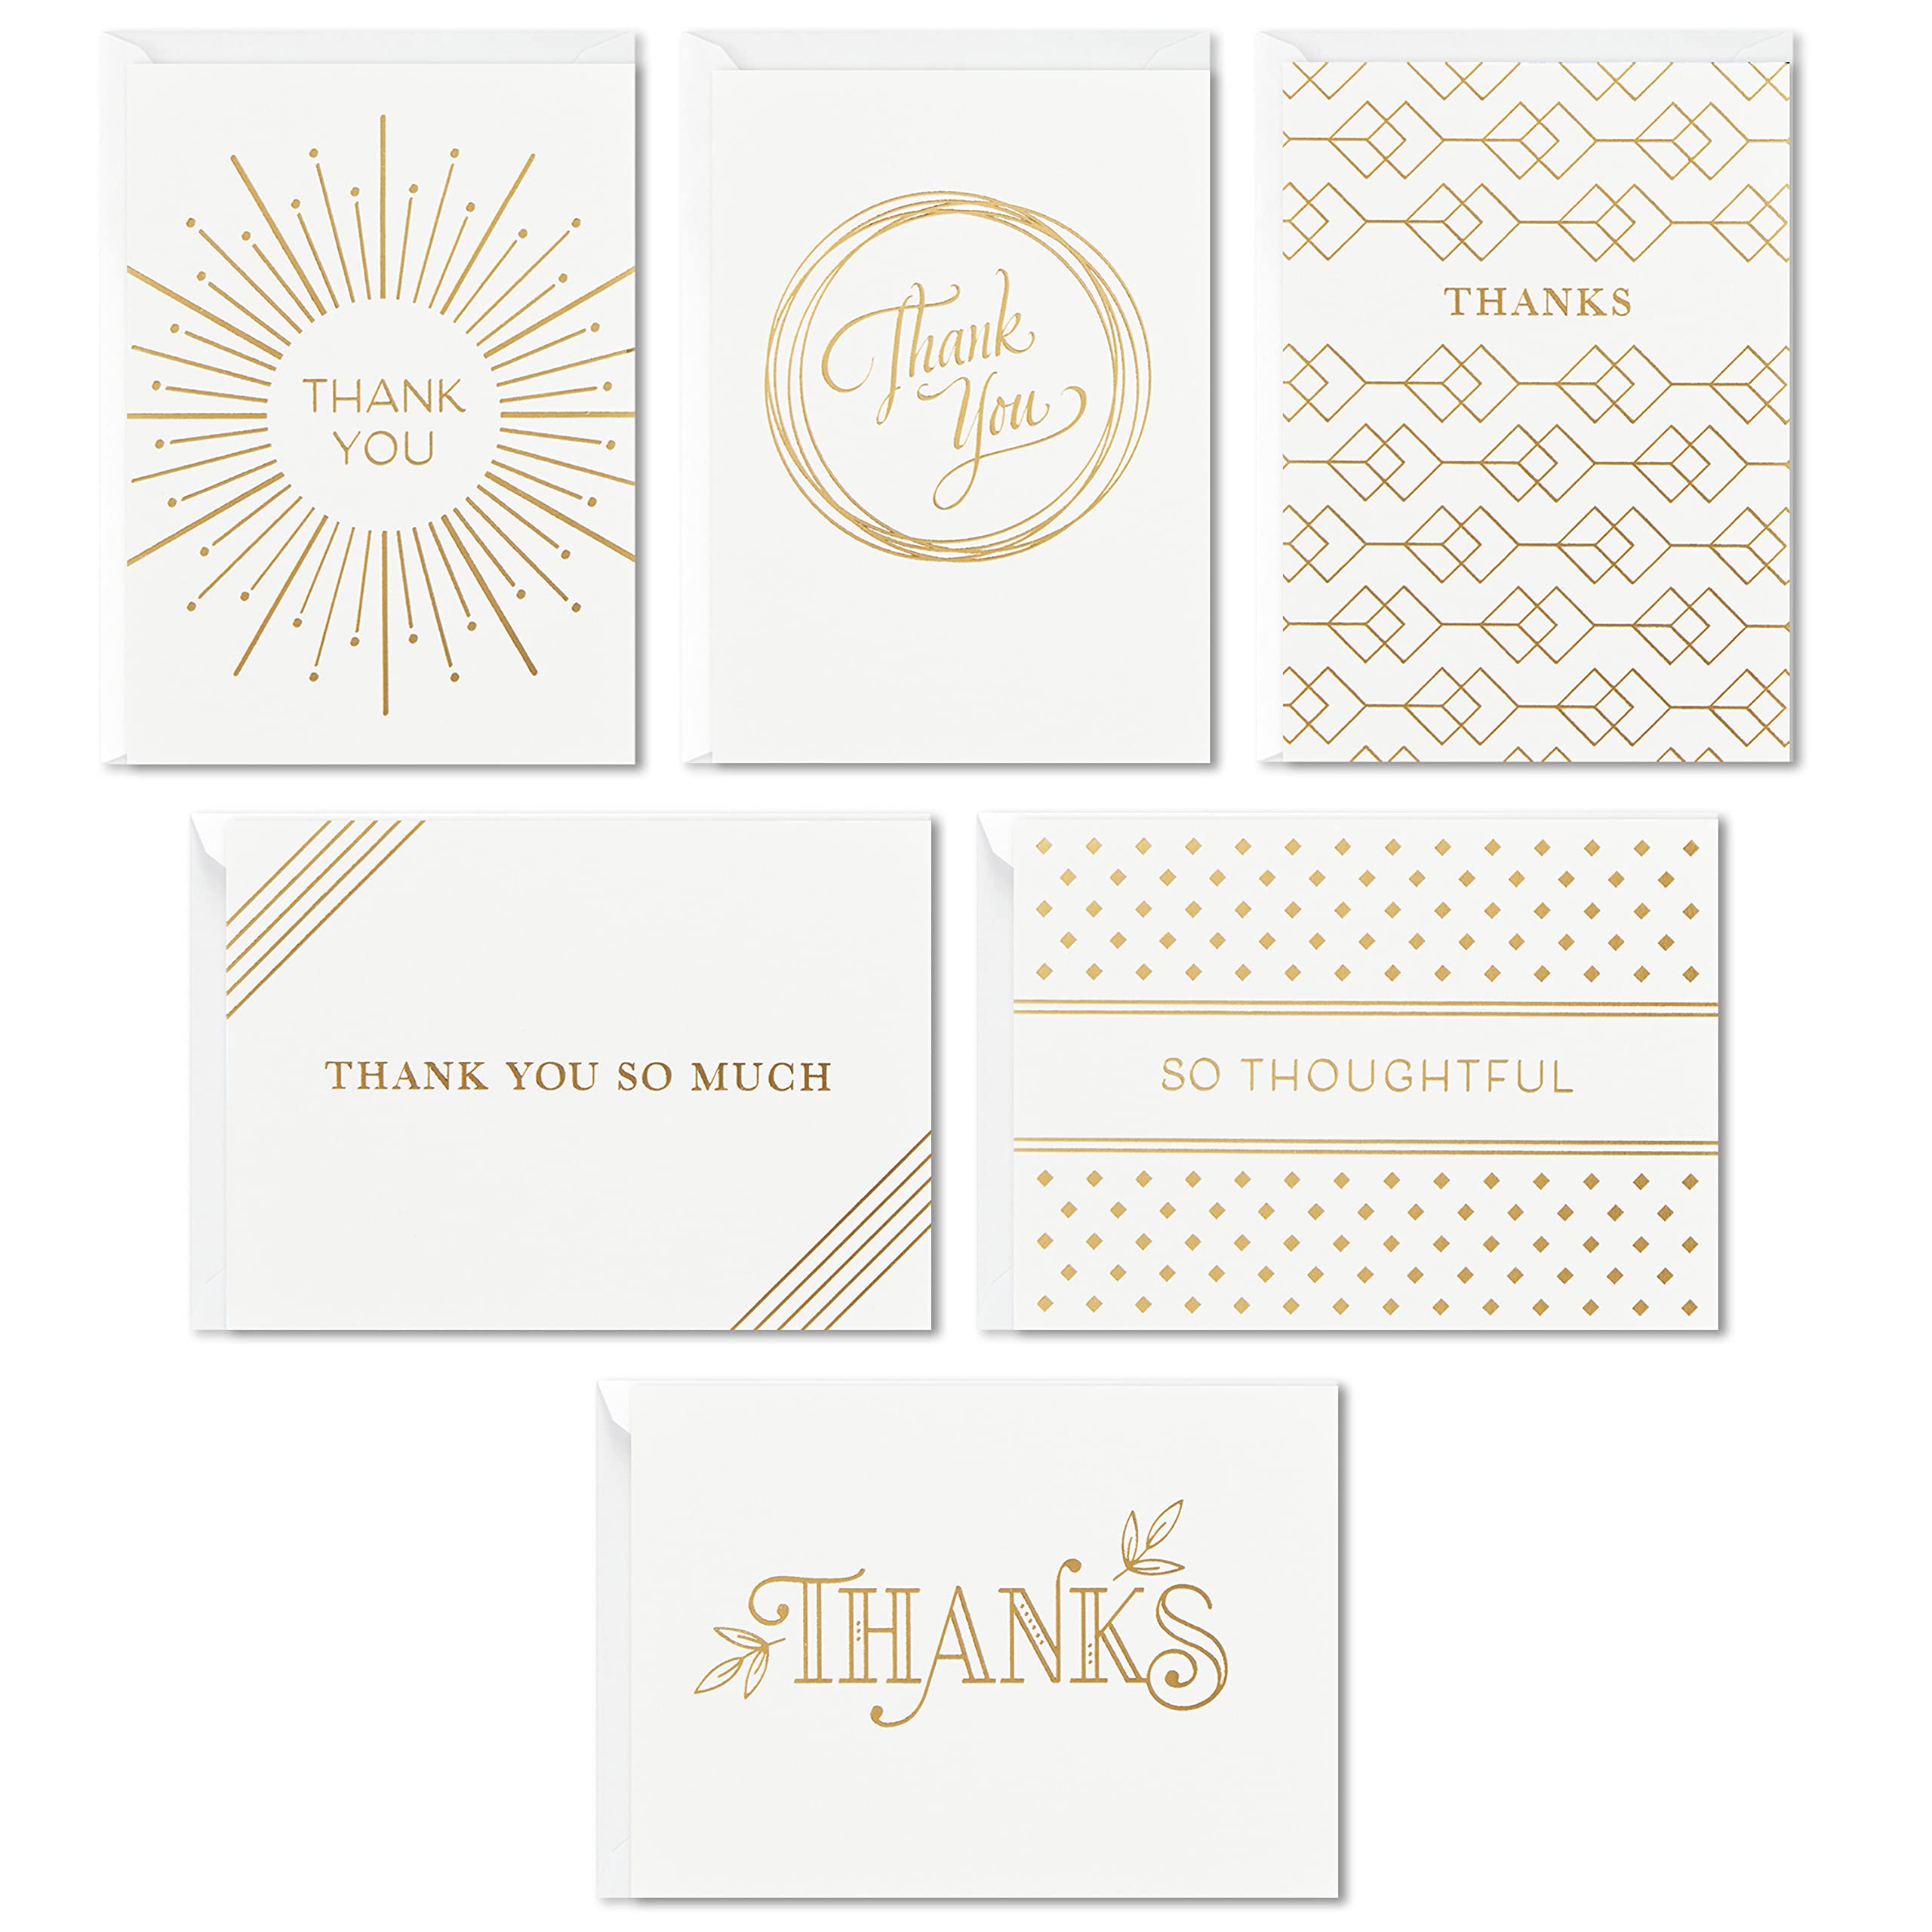 Hallmark Thank You Cards Assortment, Gold Foil & Thank You Cards Assortment, Painted Florals (48 Cards with Envelopes for Baby Showers, Bridal Showers, Weddings, All Occasion)